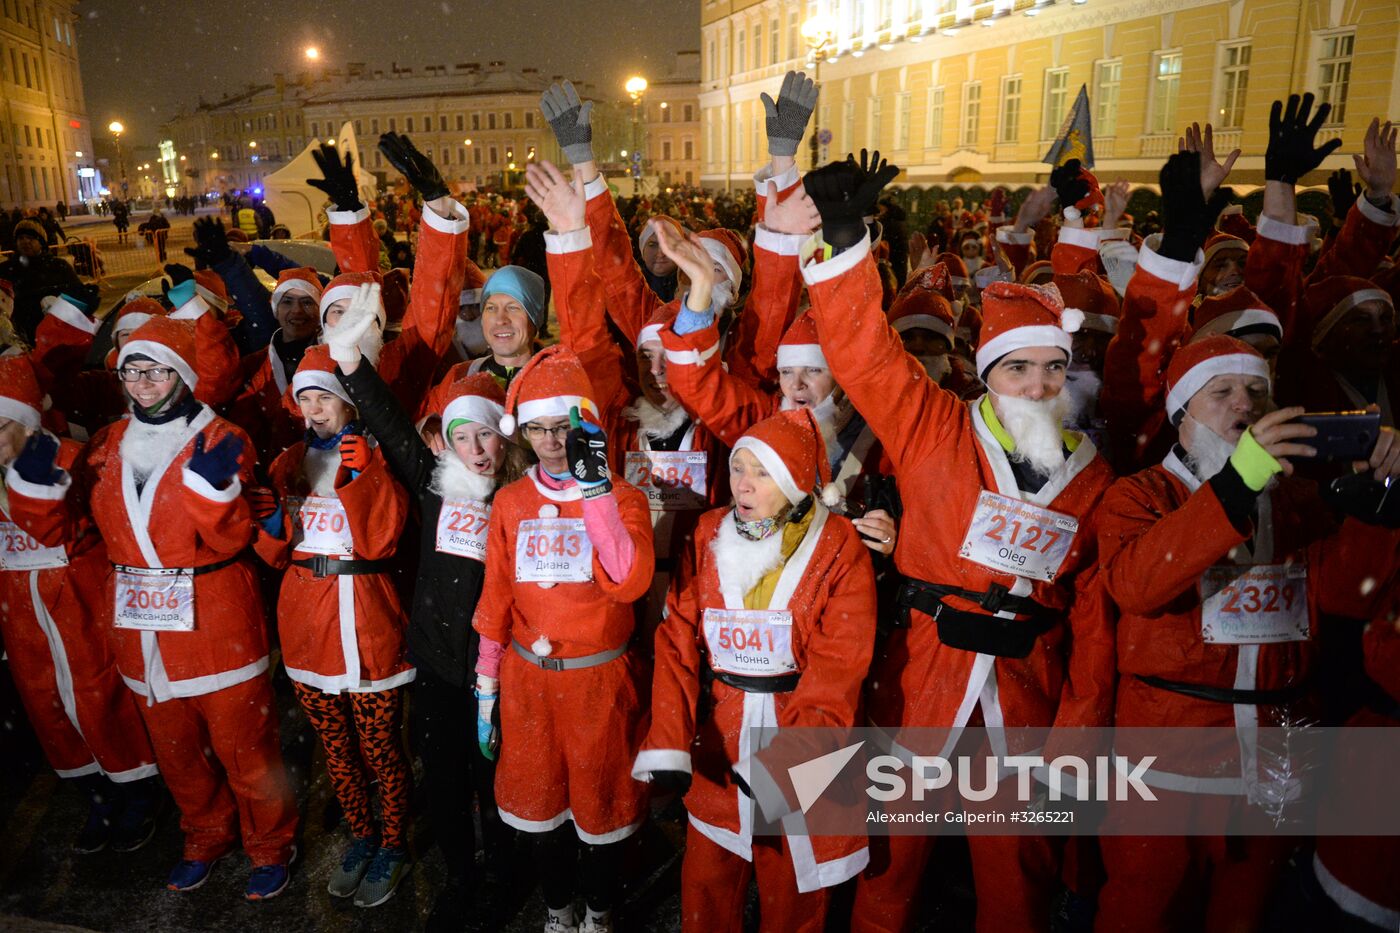 Russia's chief Father Frost is welcomed in St. Petersburg